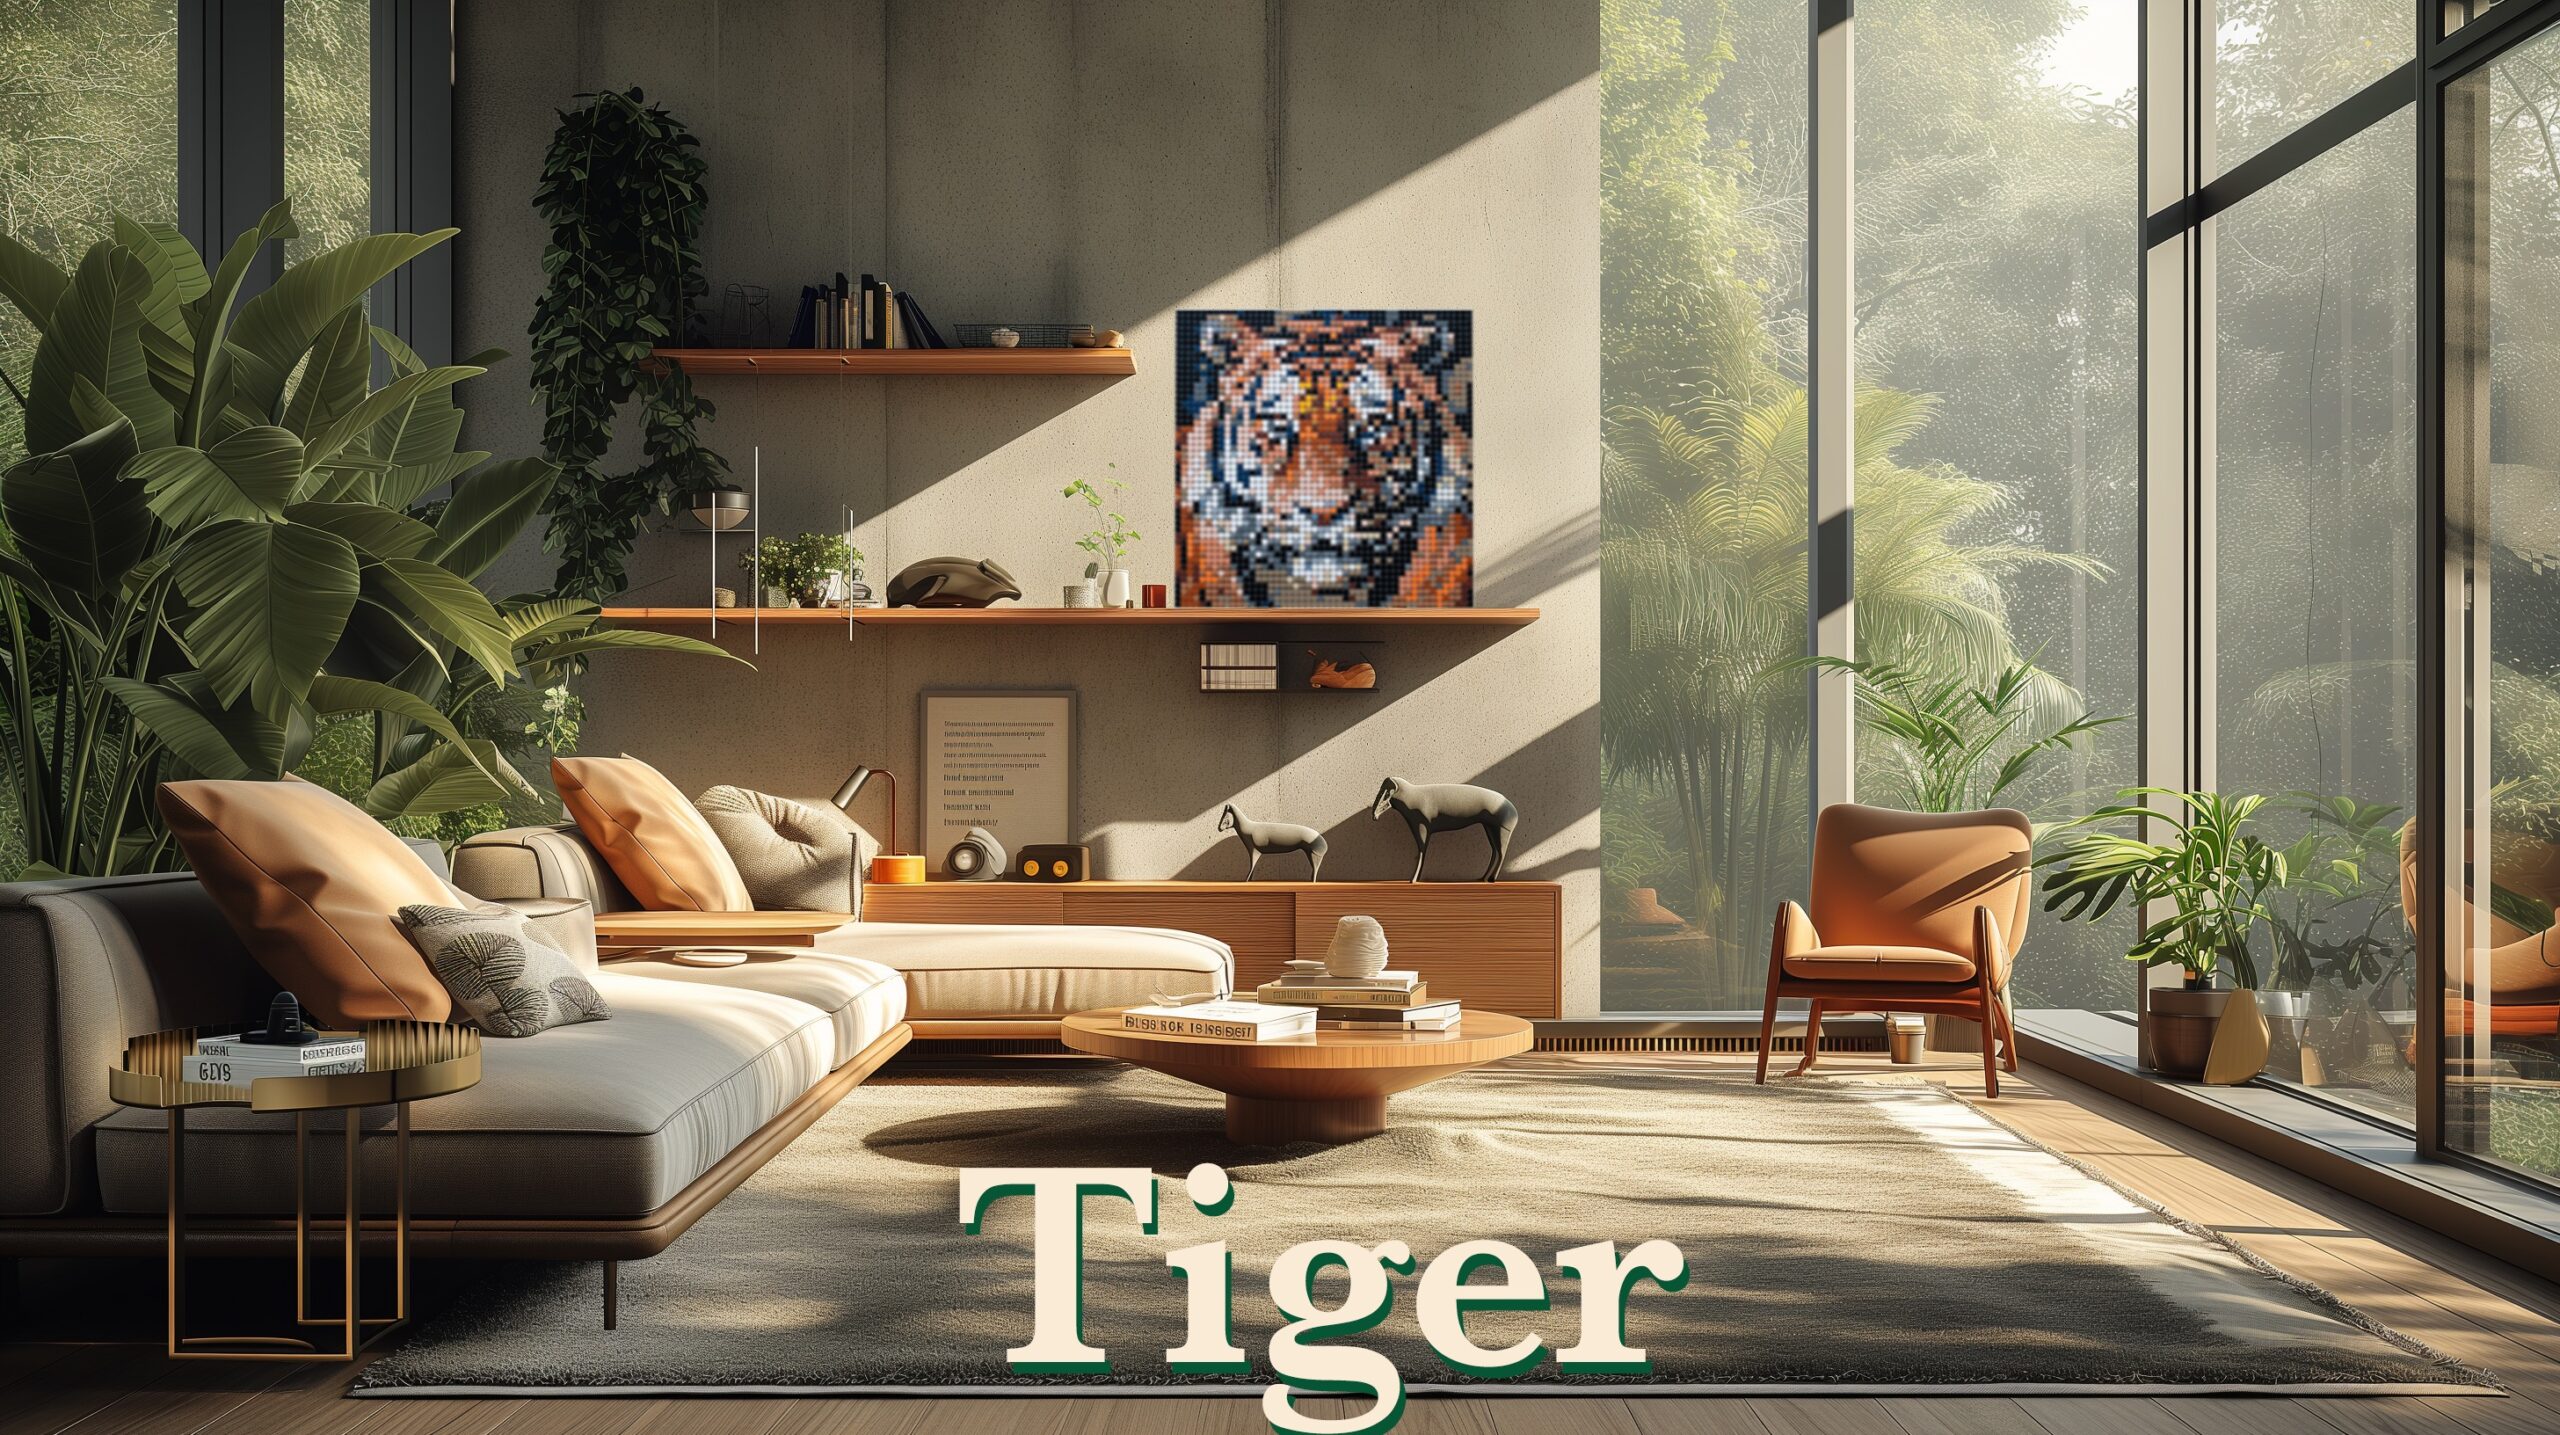 Tiger Mosaic in Room